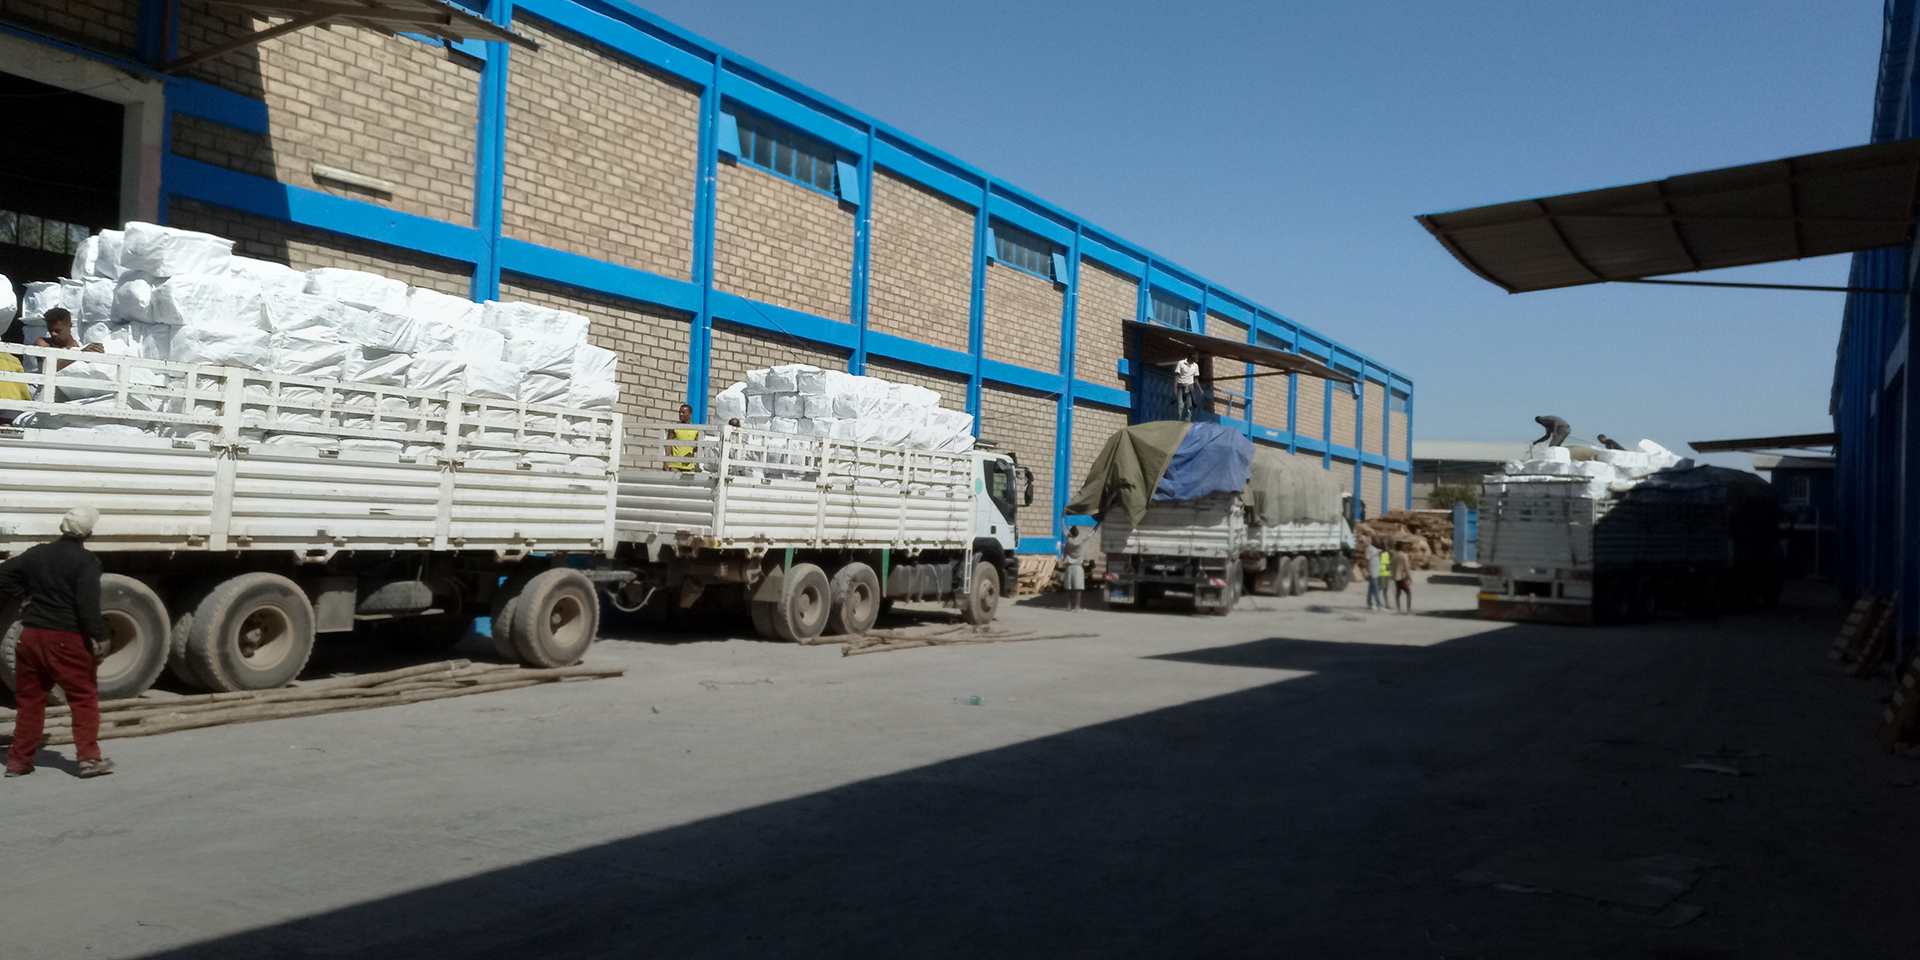 The outside of a warehouse with several white trucks loading and unloading goods.